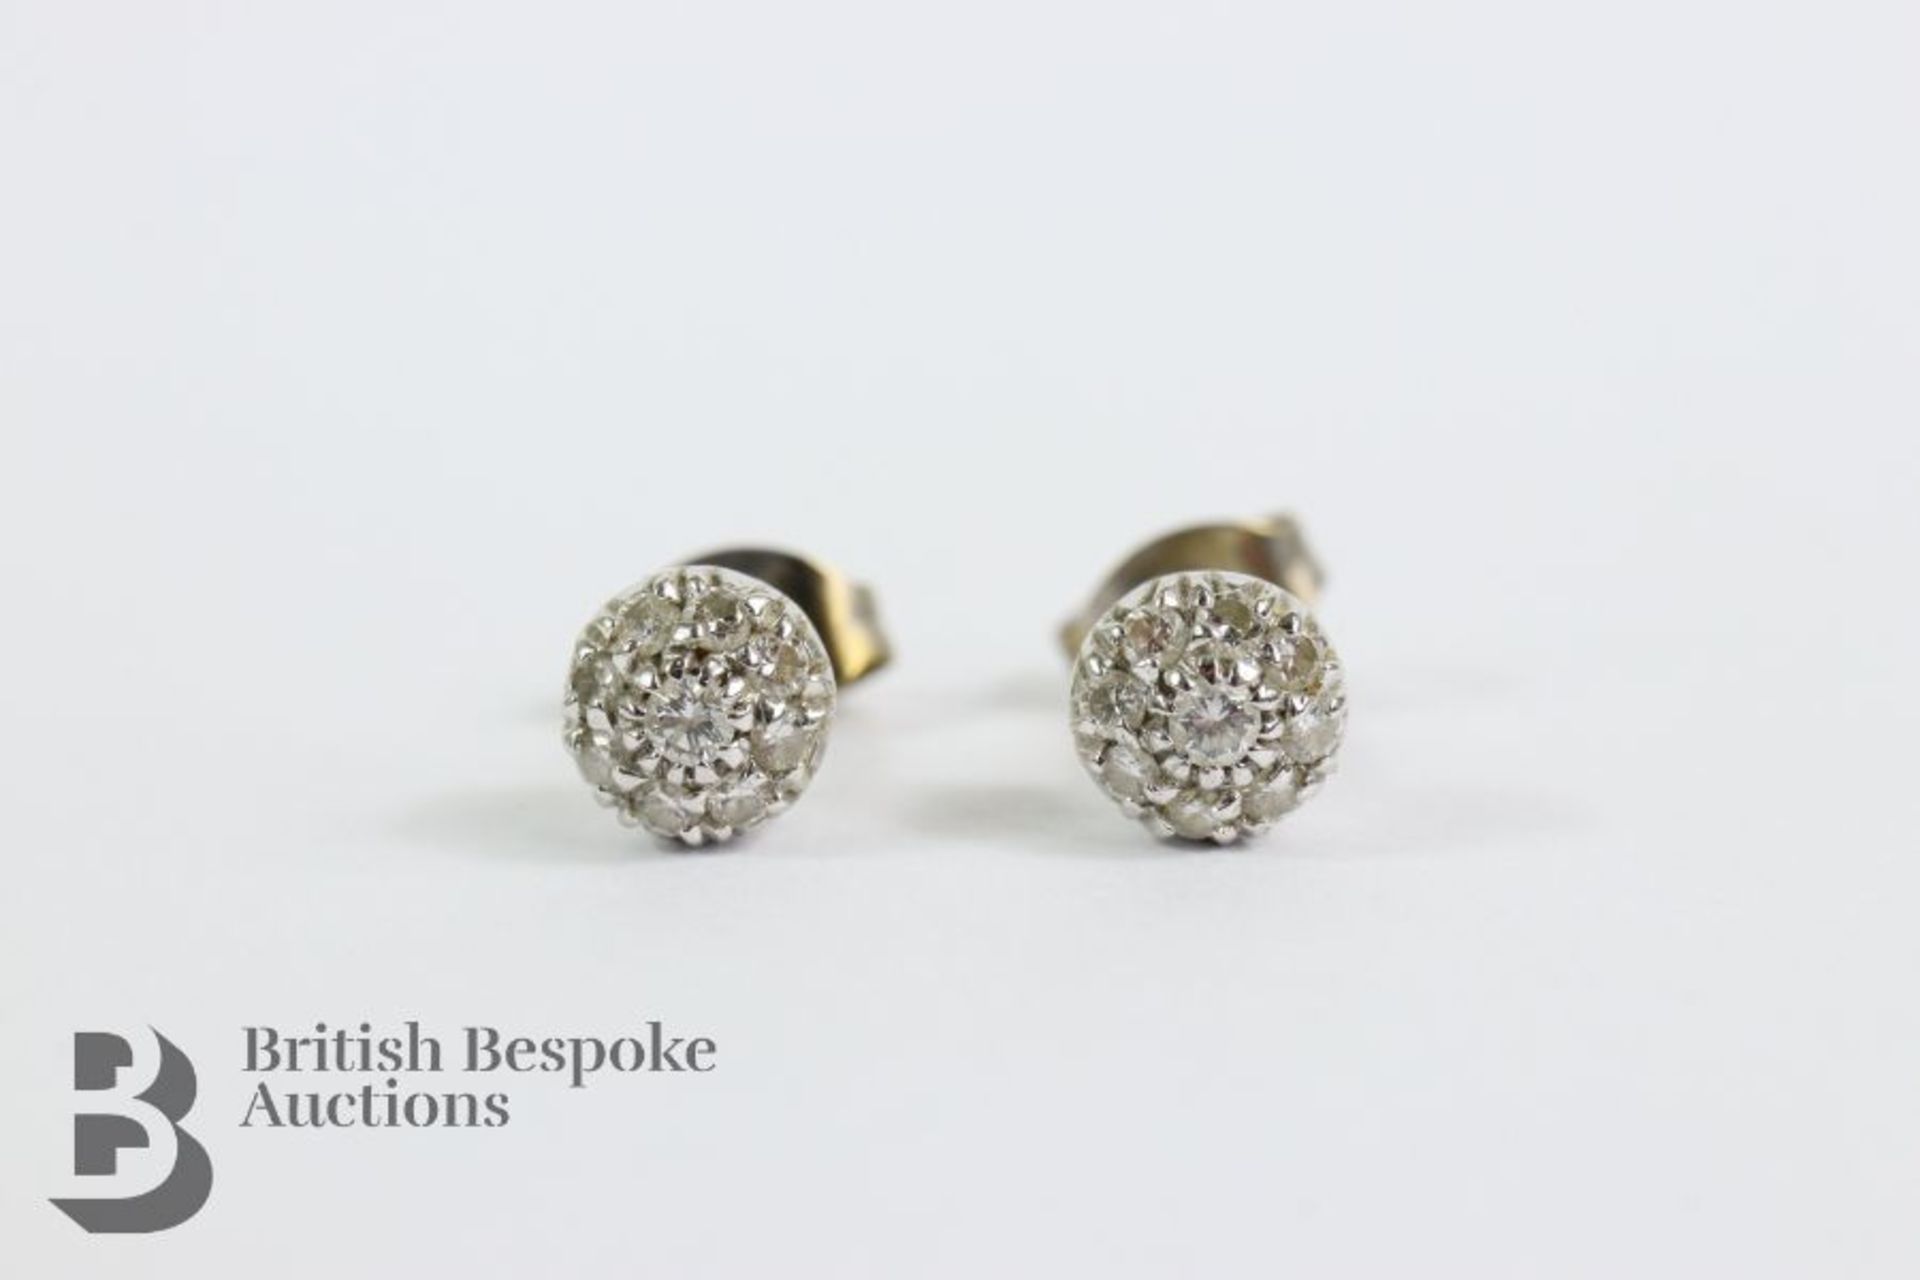 Pair of White Gold Cluster Earrings - Image 2 of 2